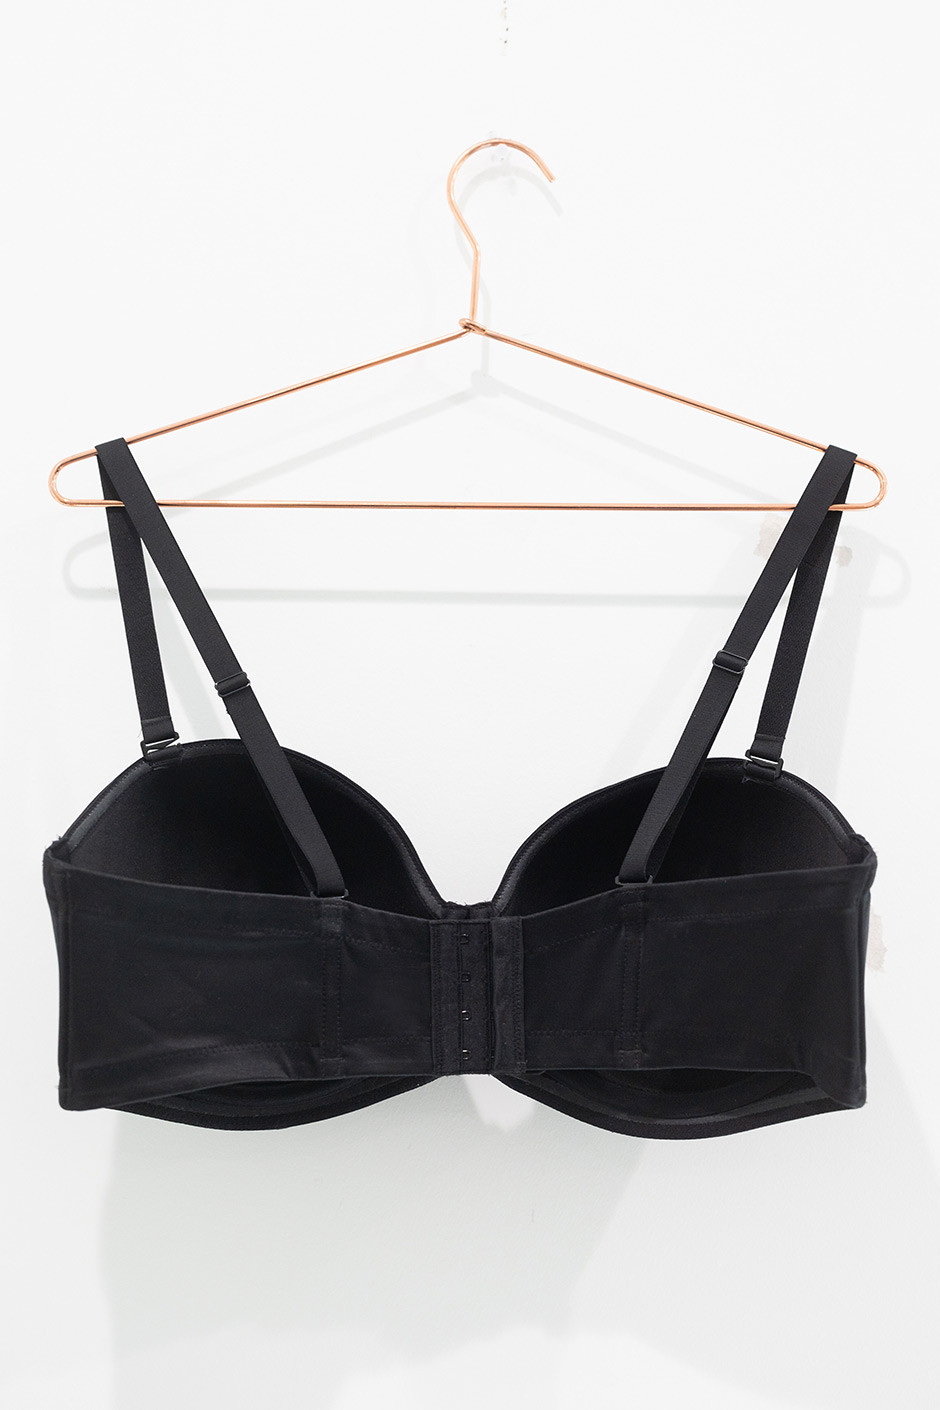 Most women are wearing the wrong size bra